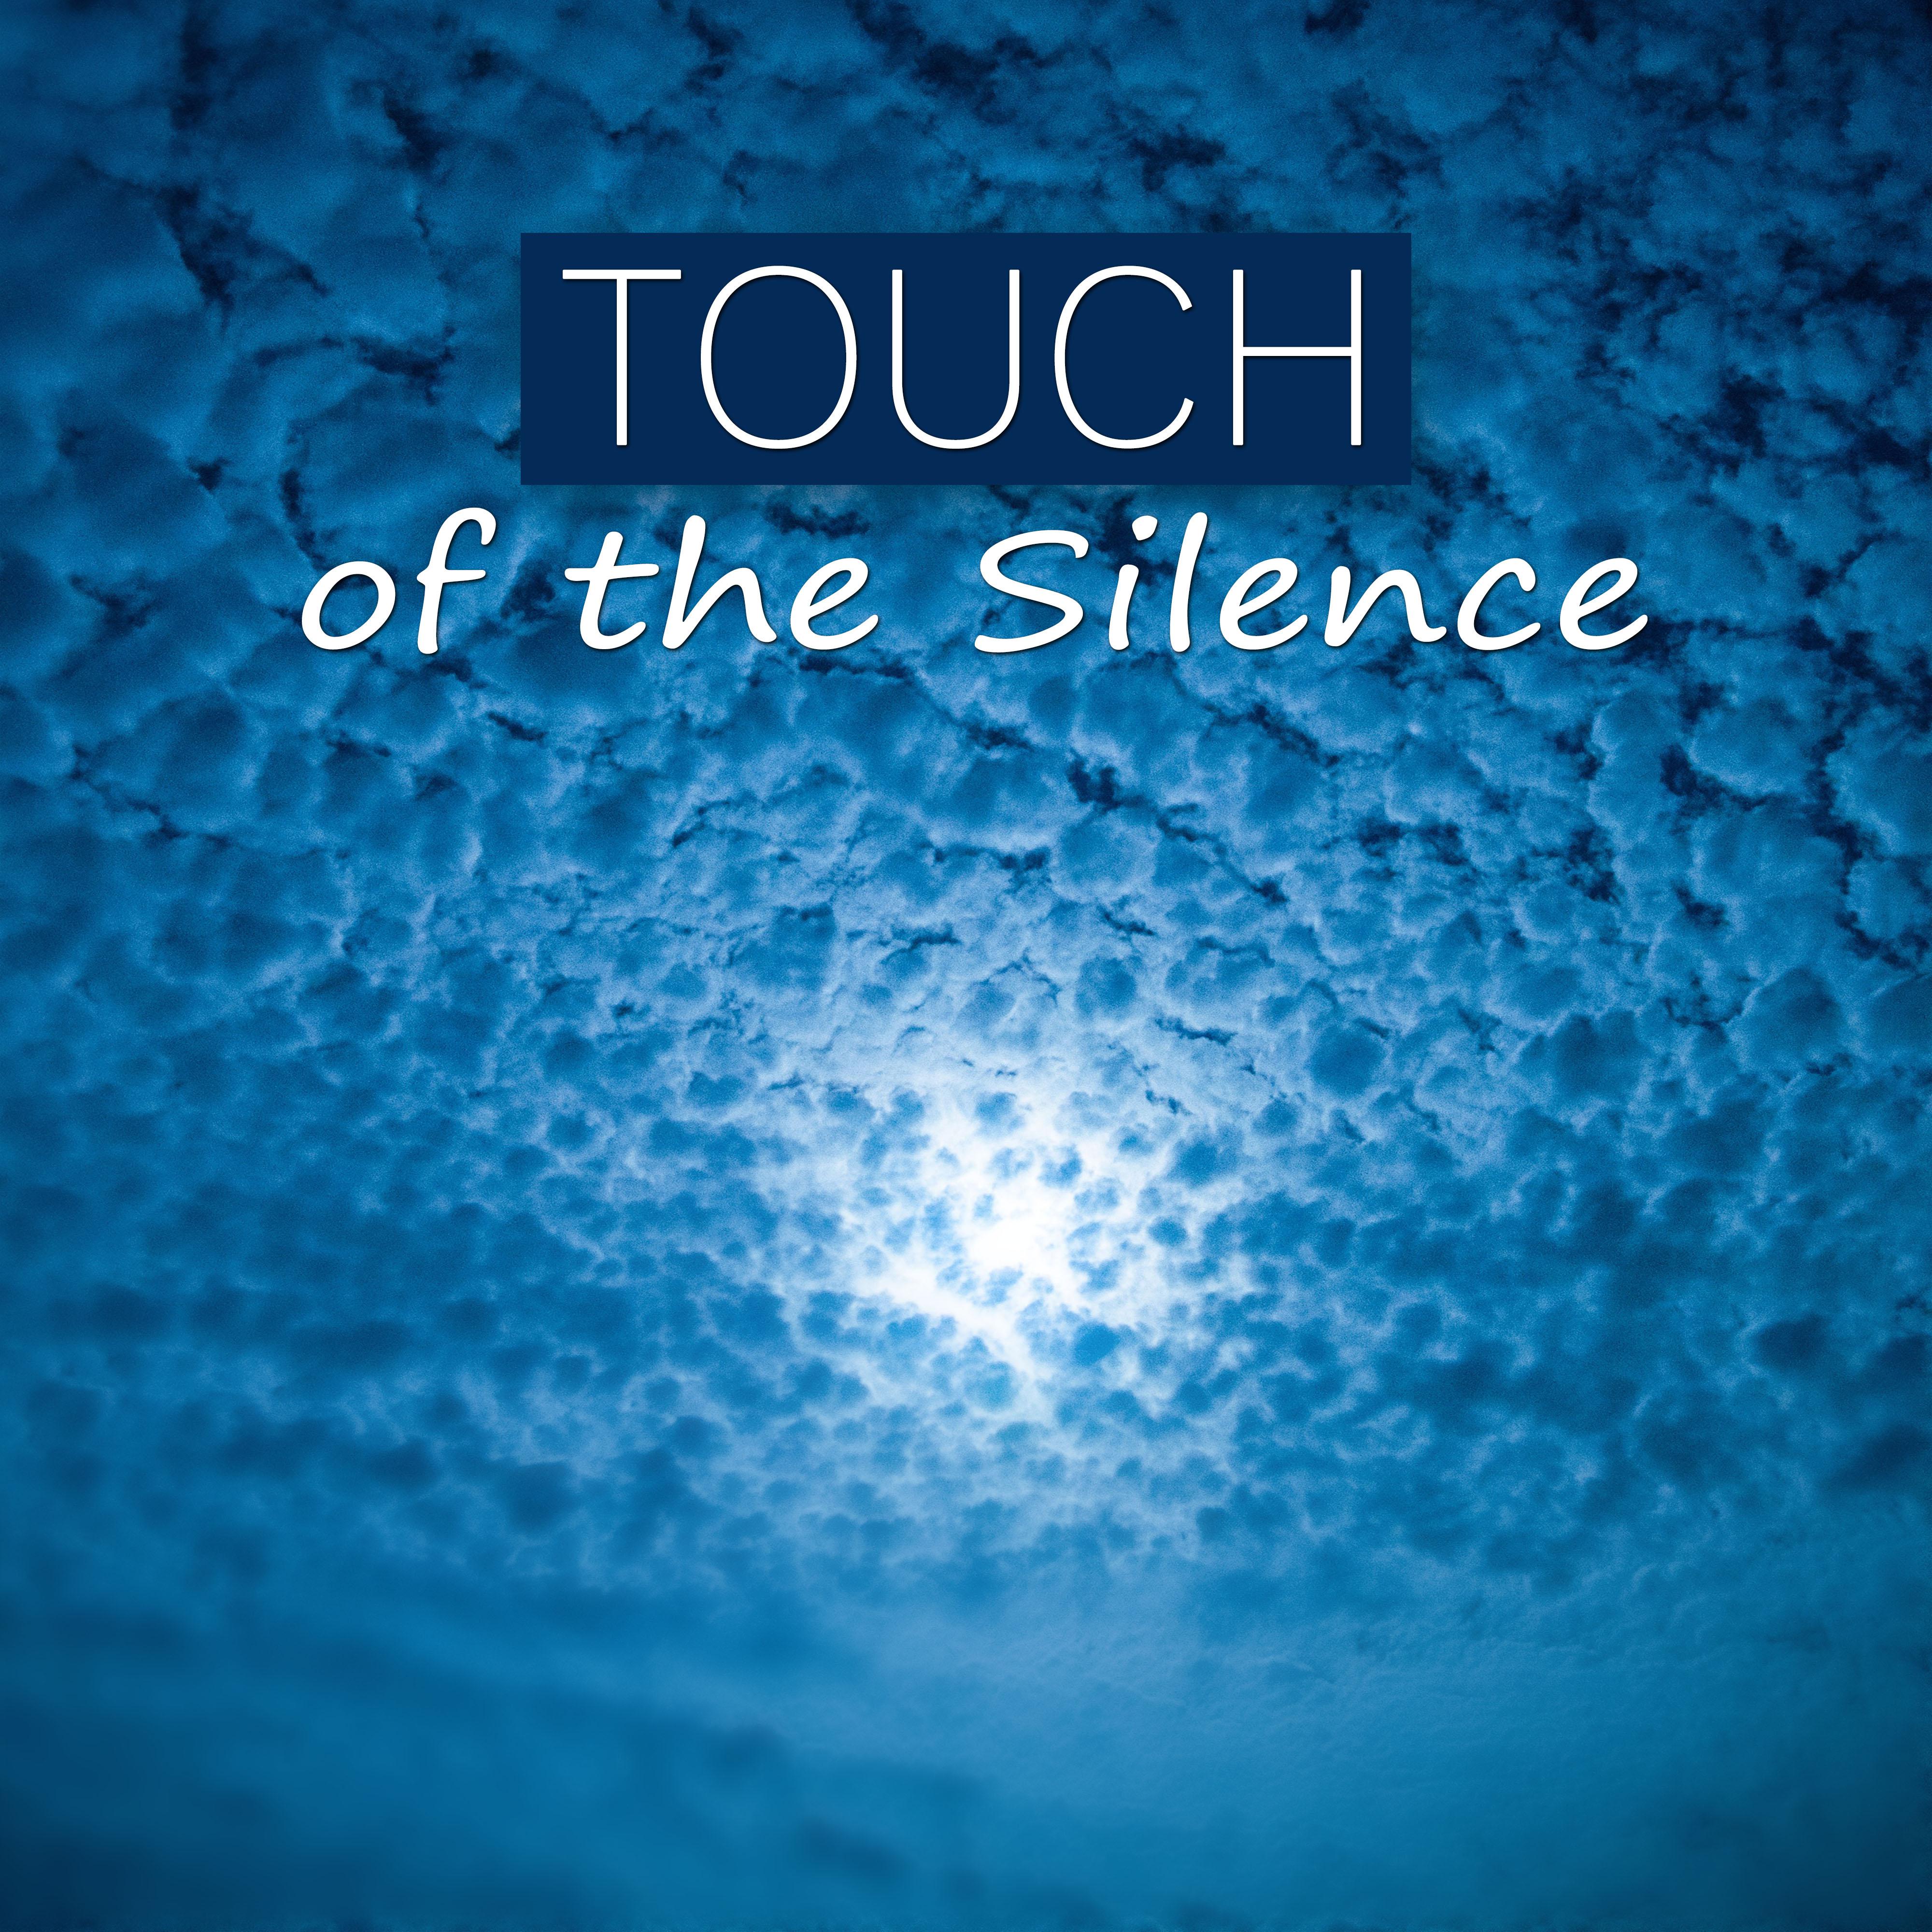 Touch of the Silence – Sleep Well, Sounds of Silence, Sweet Dreams, Music for Restful Sleep